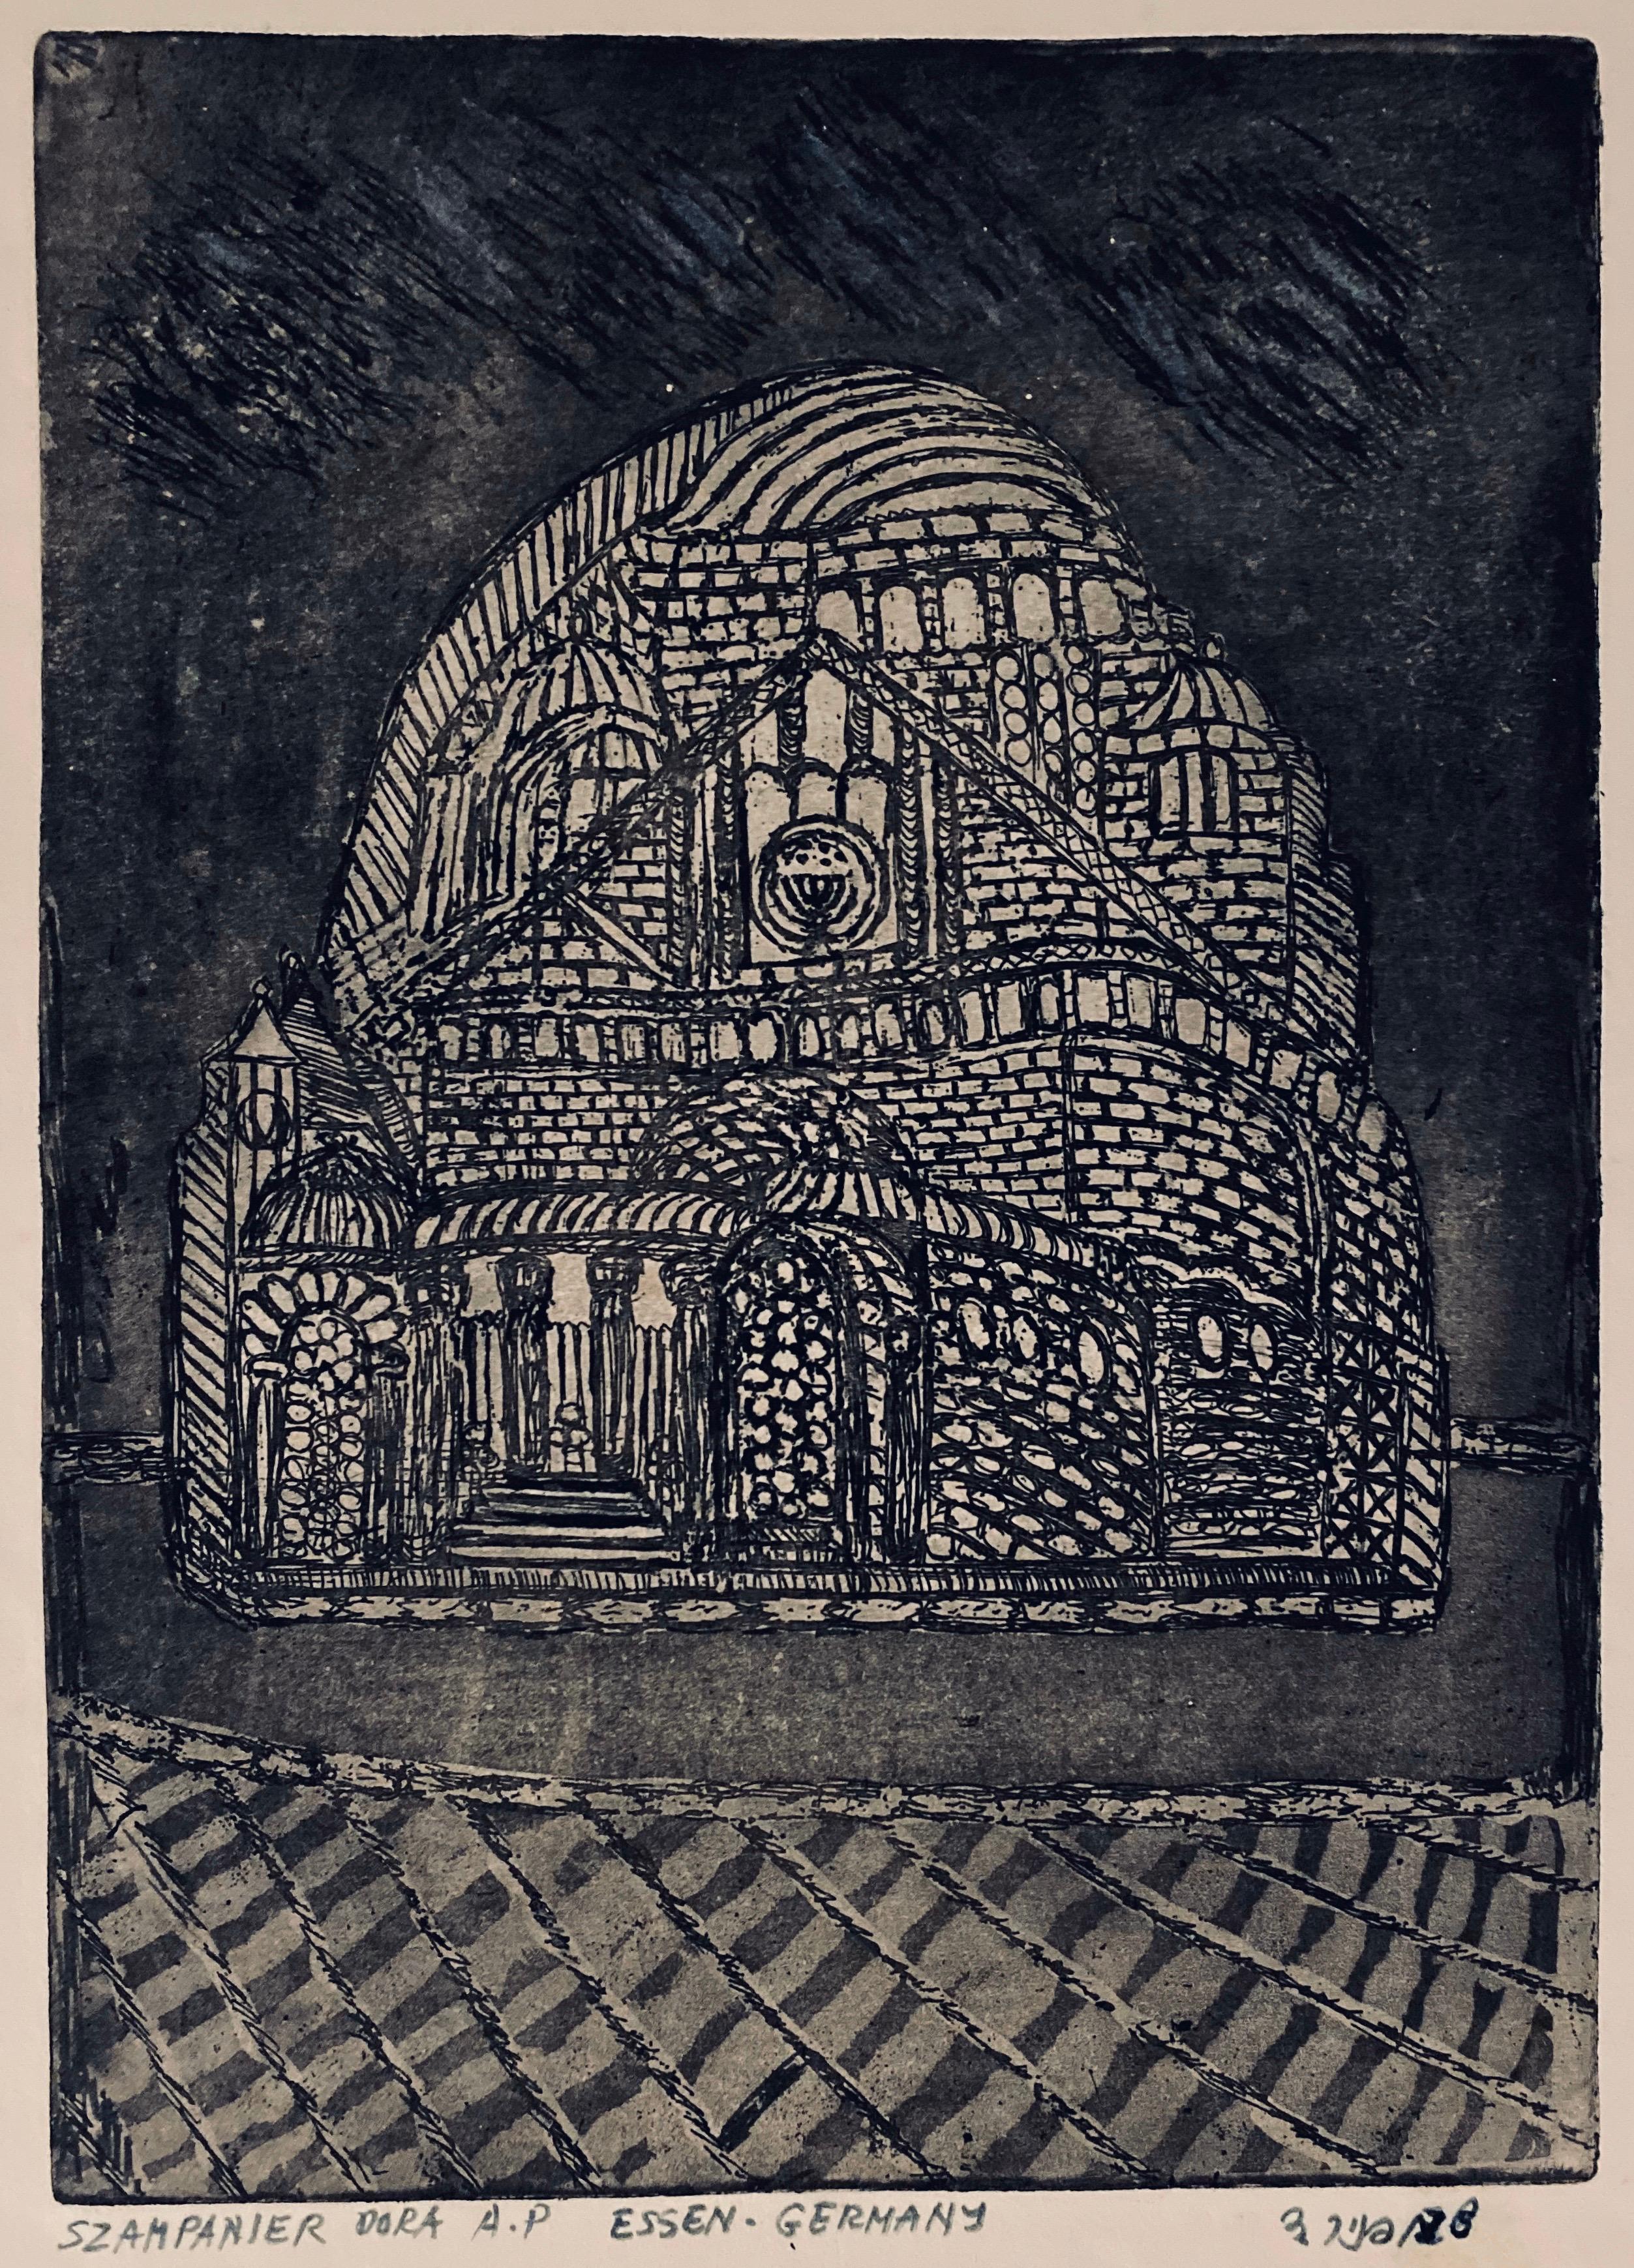 Etching of destroyed synagogue - Essen, Germany 